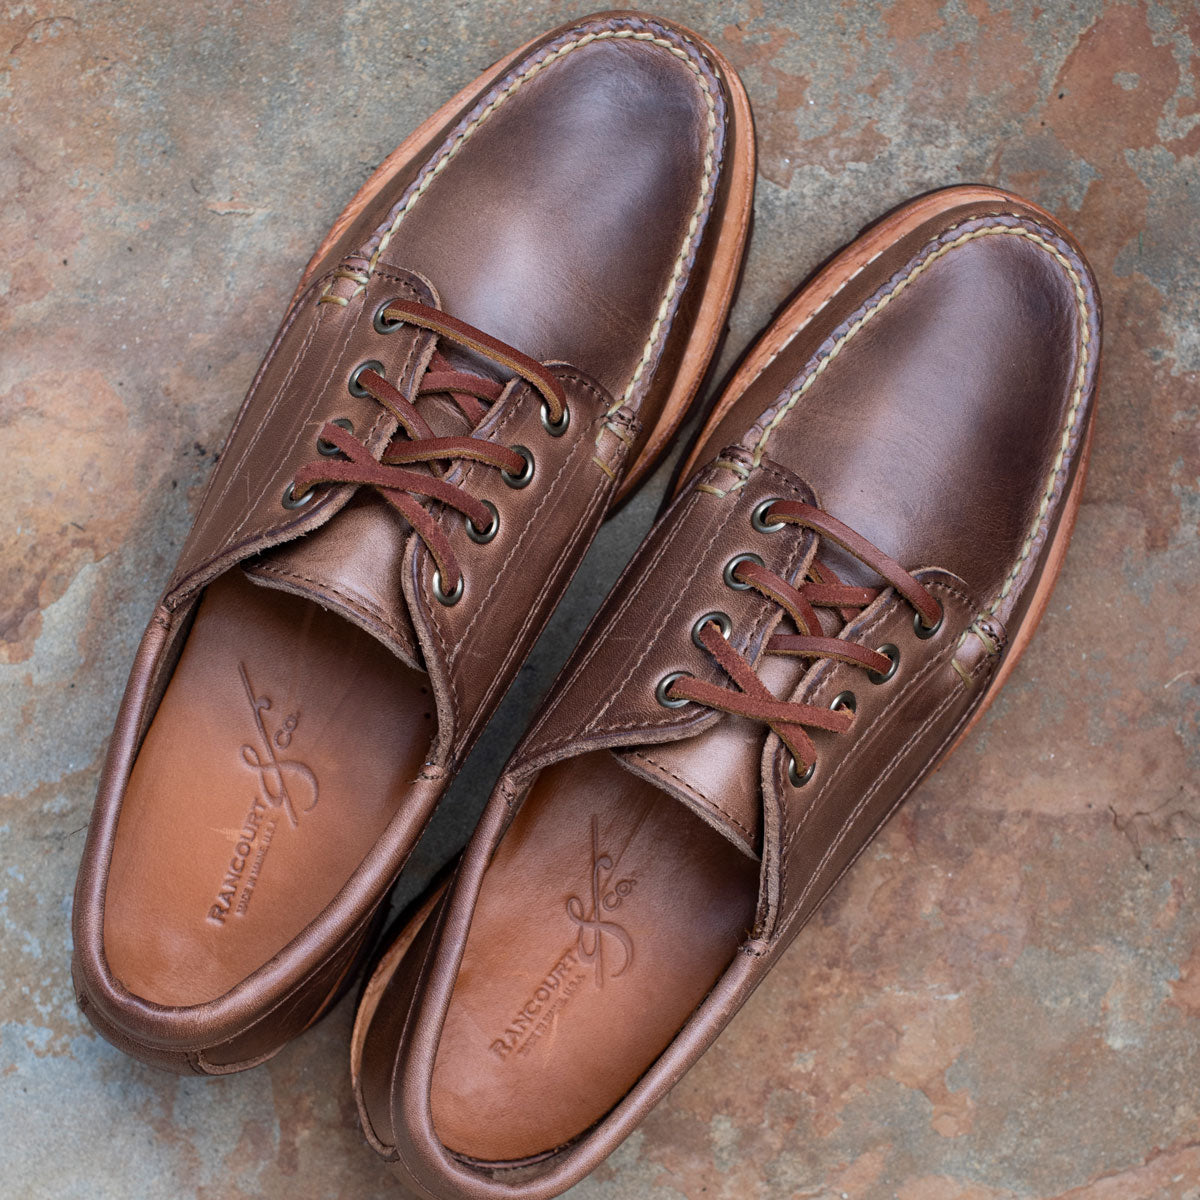 Rancourt Read Boat Shoes: Out of the Box - Initial Impressions 100wears